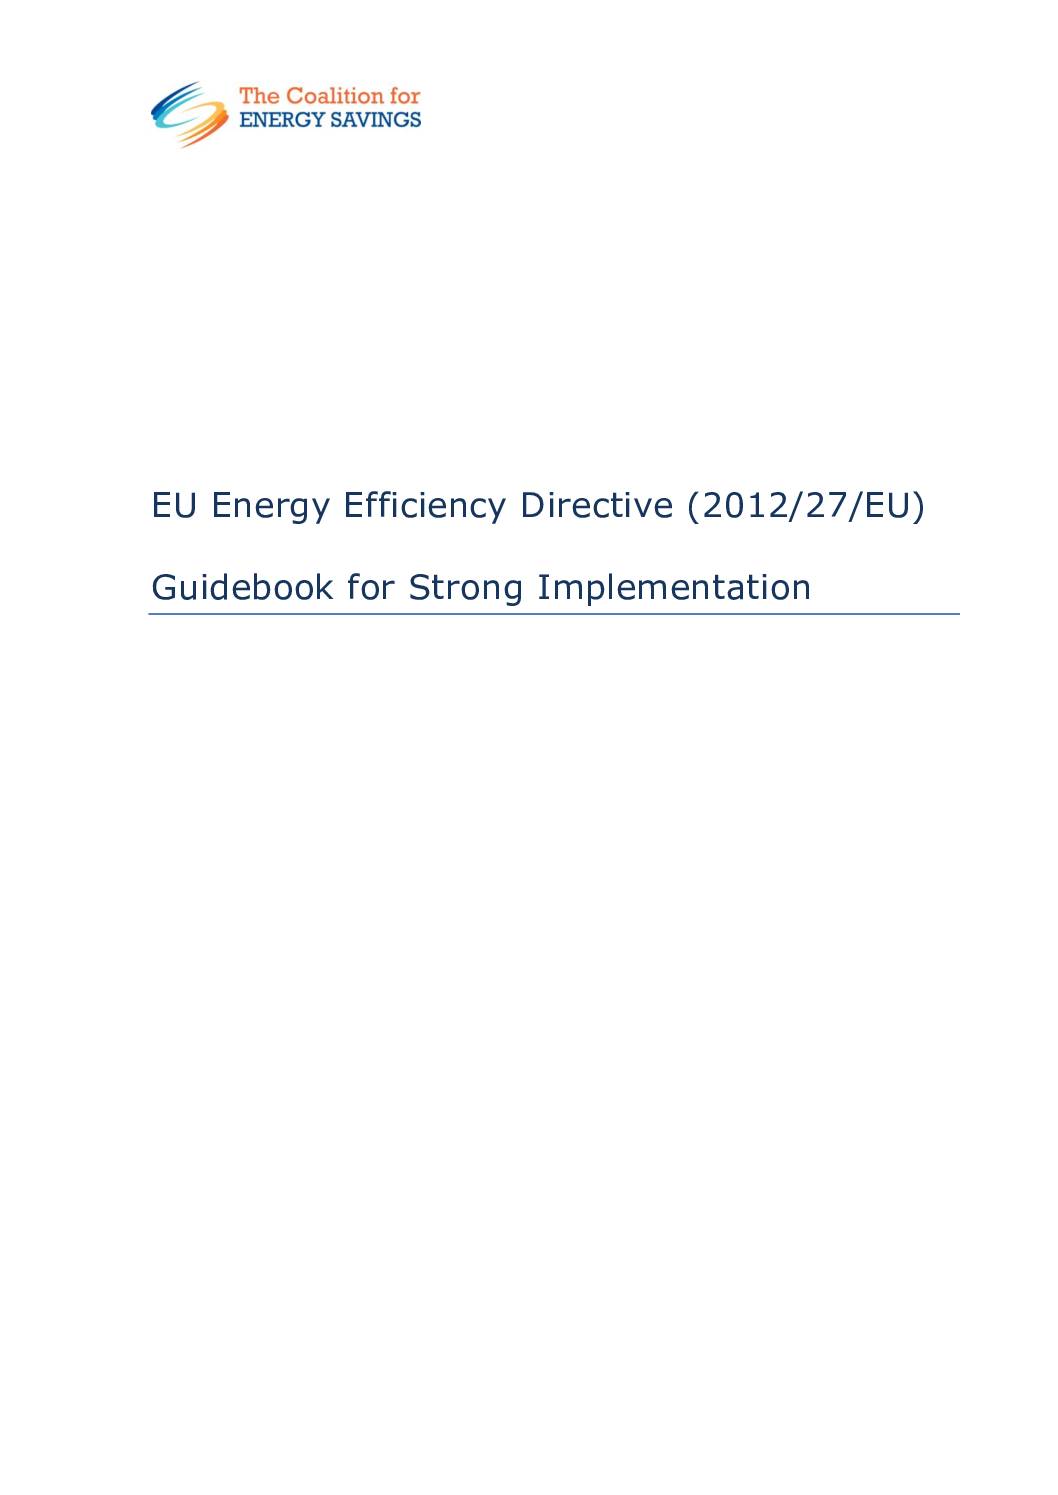 EU Energy Efficiency Directive: Guidebook for Strong Implementation